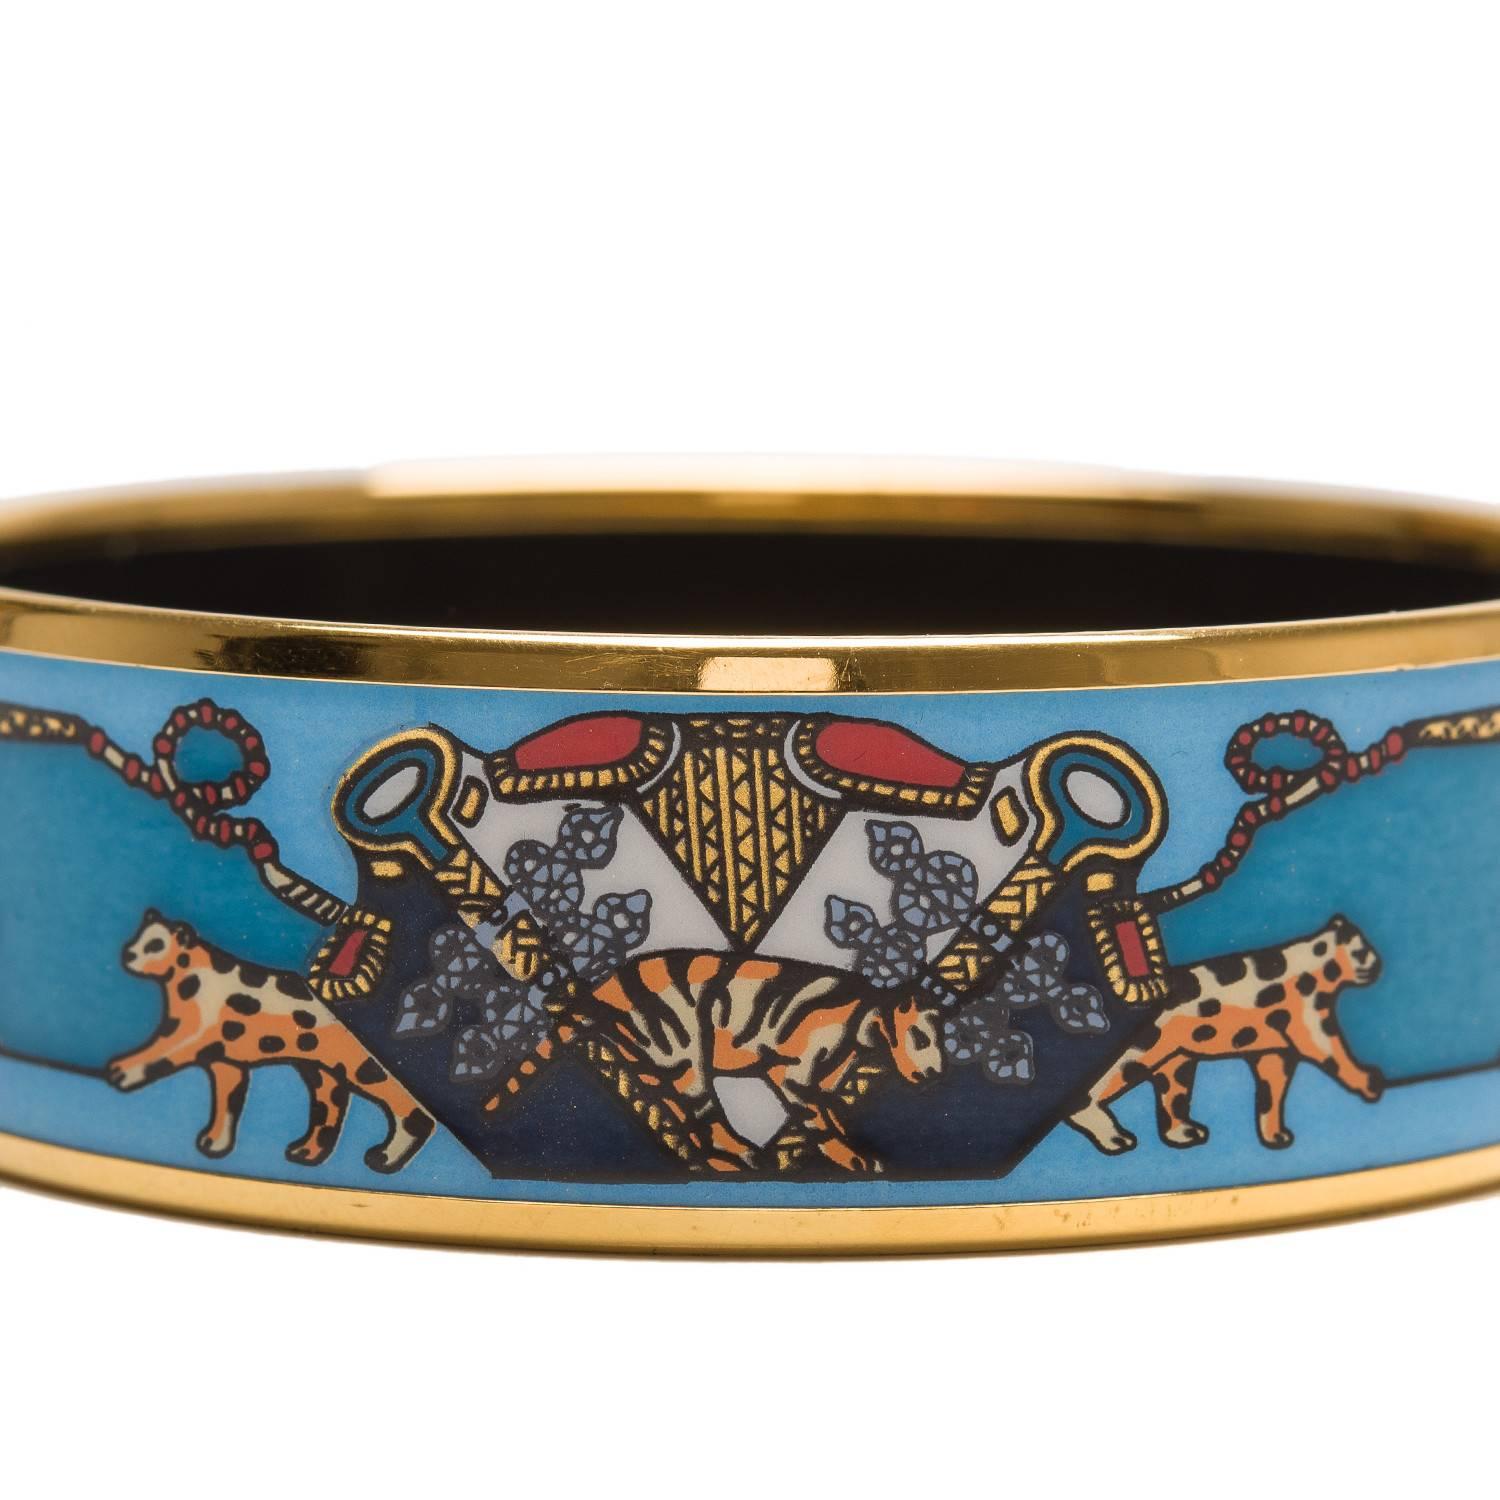 Hermes "Snow Leopards" Wide enamel bracelet size PM (65).

This bracelet depicts a Central Asian theme of two green decorative flags with a tiger at center and snow leopards on each side in a shades of blue backaground with gold plated